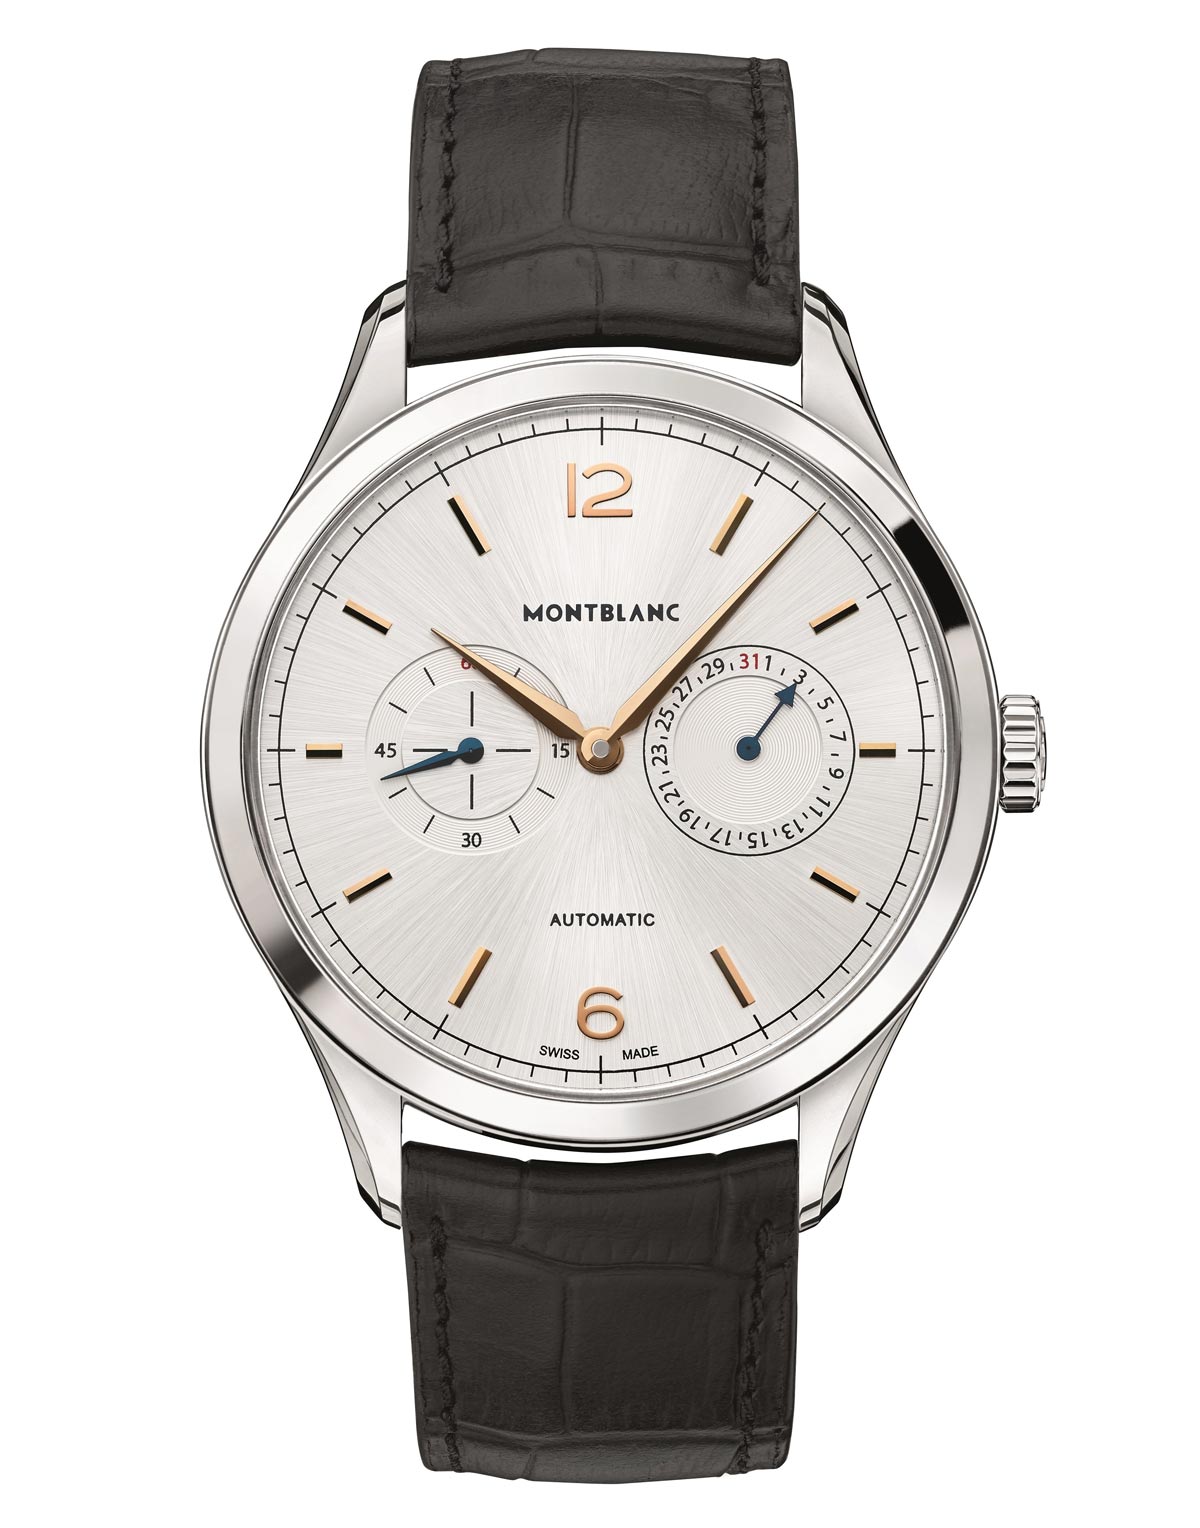 The Montblanc Heritage Chronometrie Twincounter Date, featuring a new in-house movement.